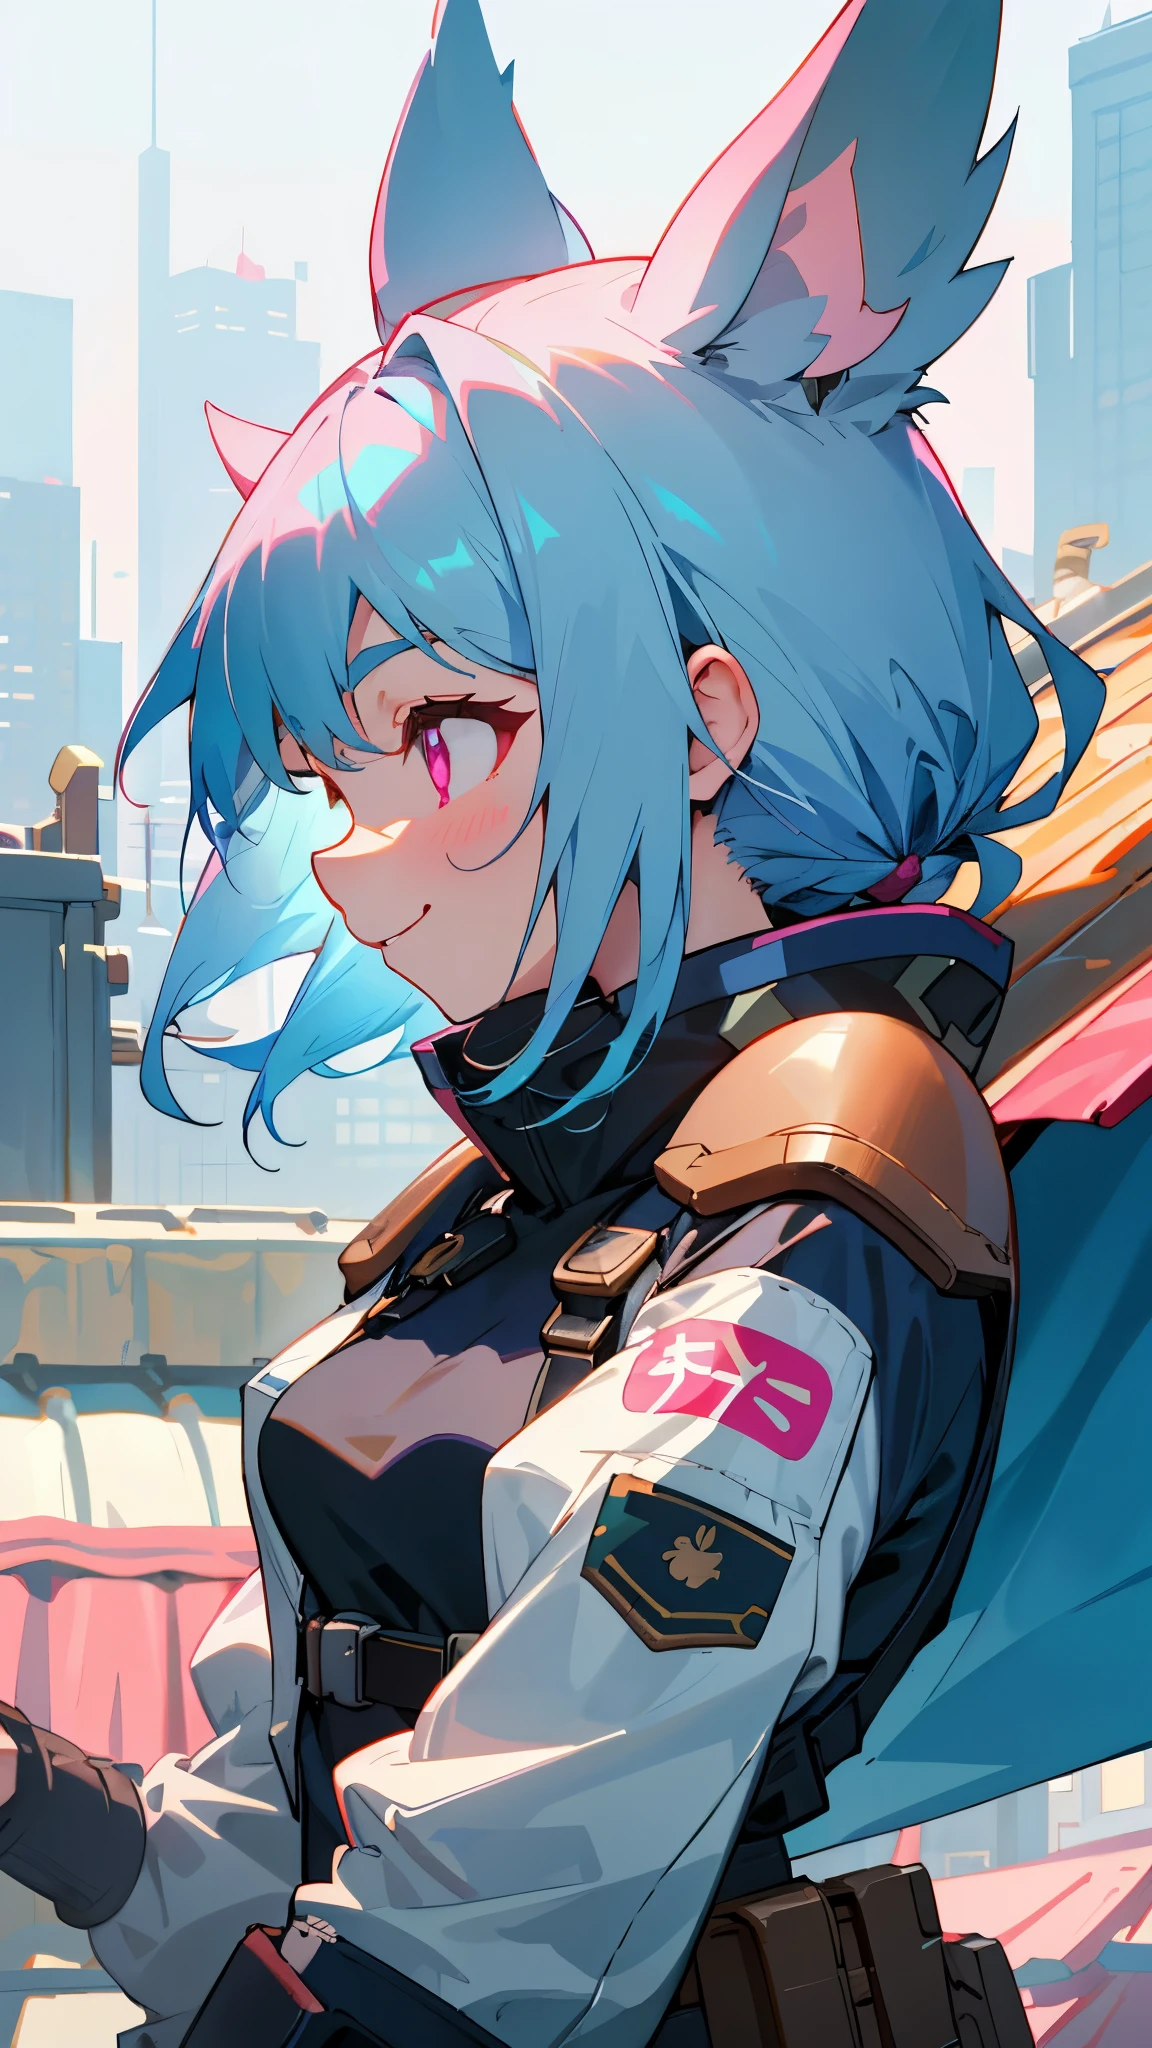 16 year old girl、wrap yourself in a battle jacket、casual style、small breasts、light blue hair、dog ears、pink eyes、profile、lots of acorns、smile、upper body close-up、Rooftop of urban building area